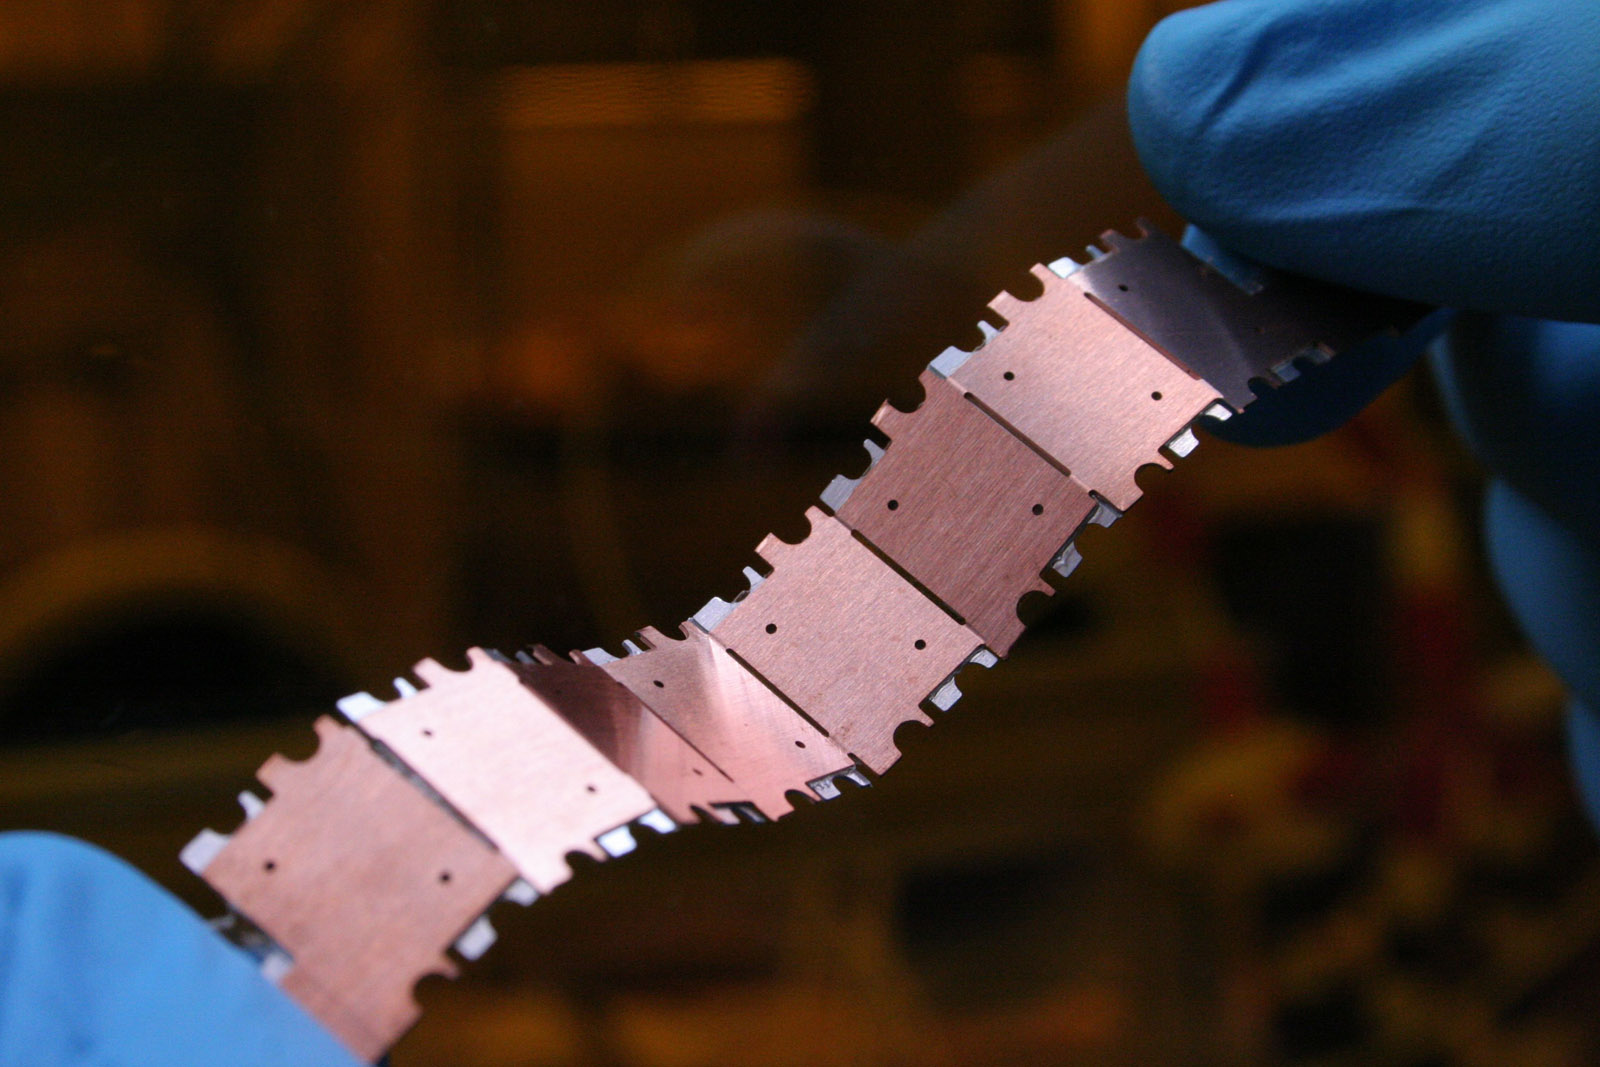 Mechanically flexible micro battery stripe made from segmented battery cells